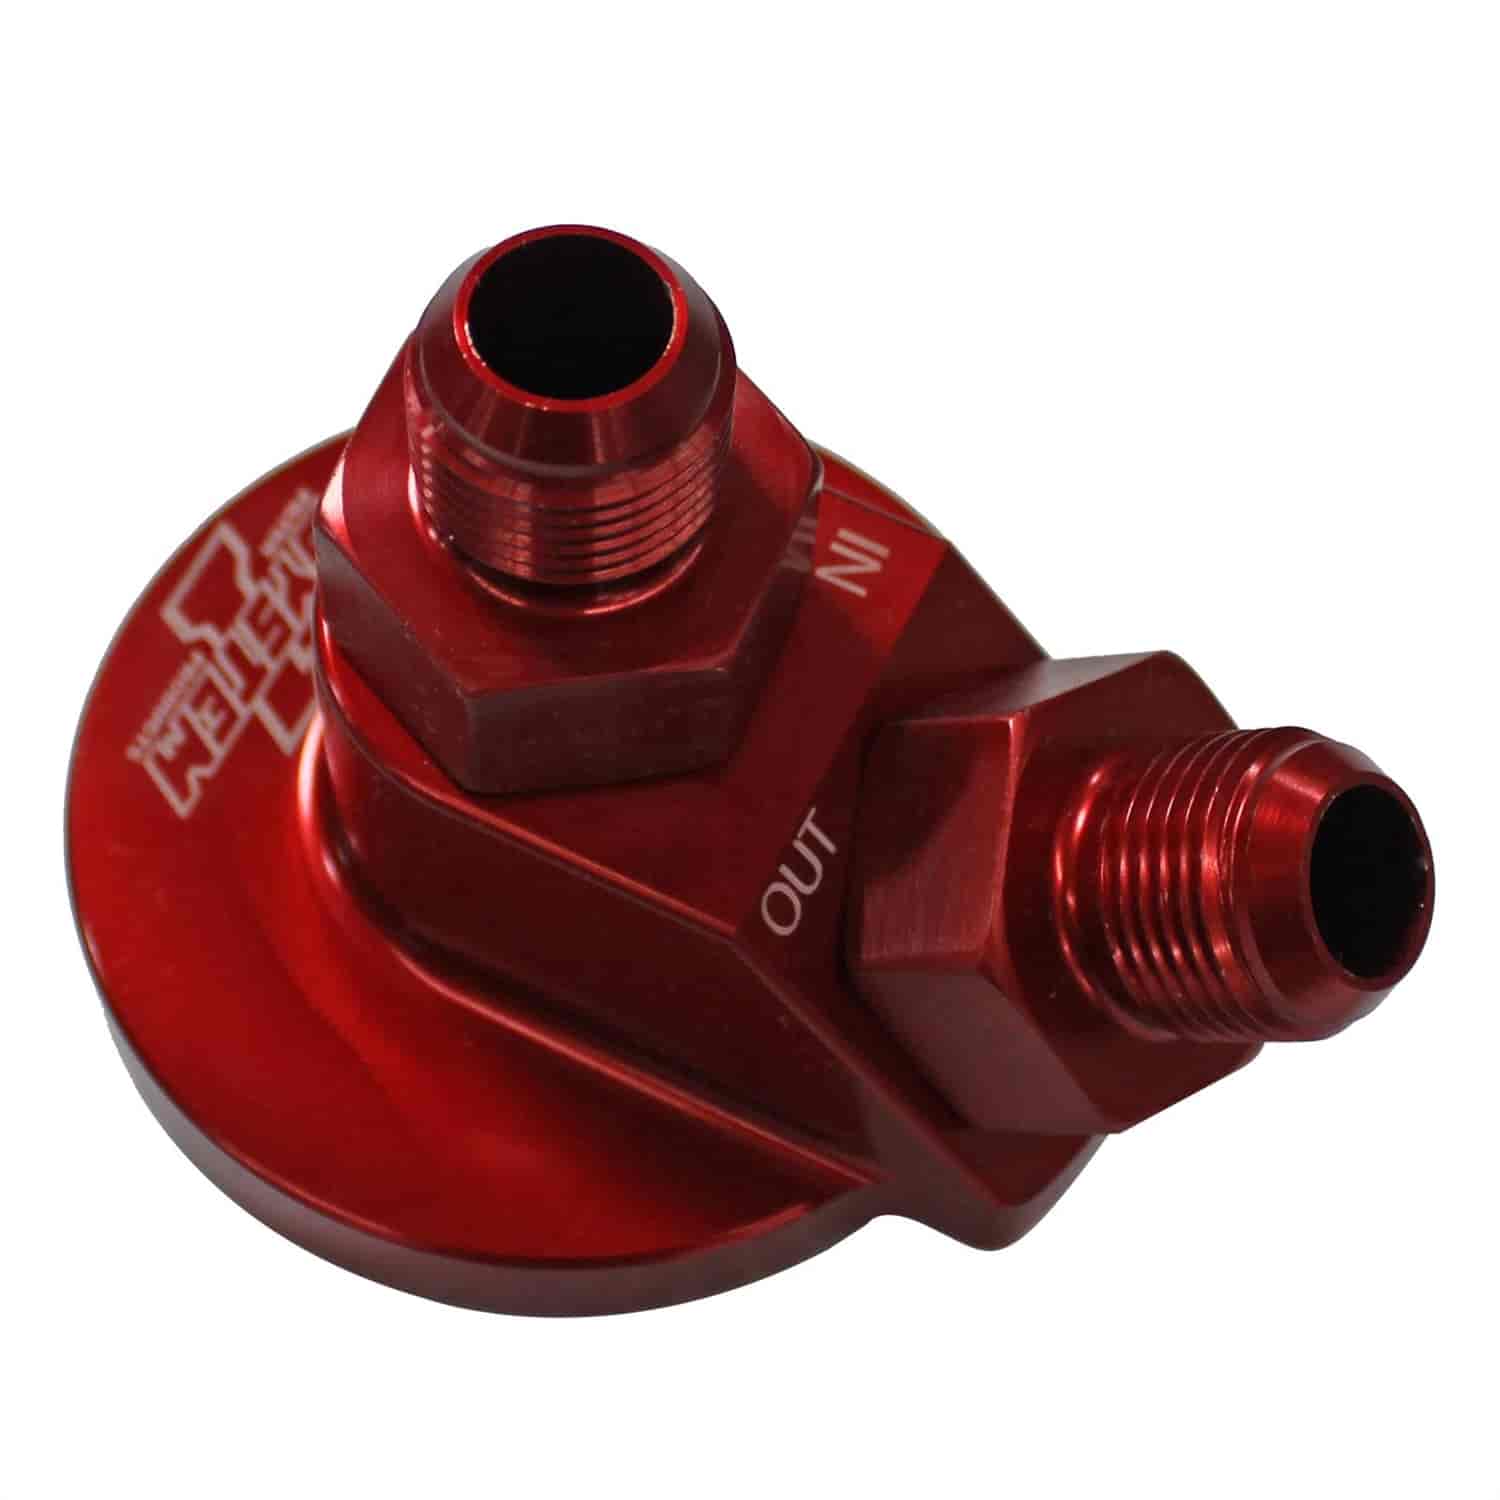 Ford block adapter billet AN-10 fittings